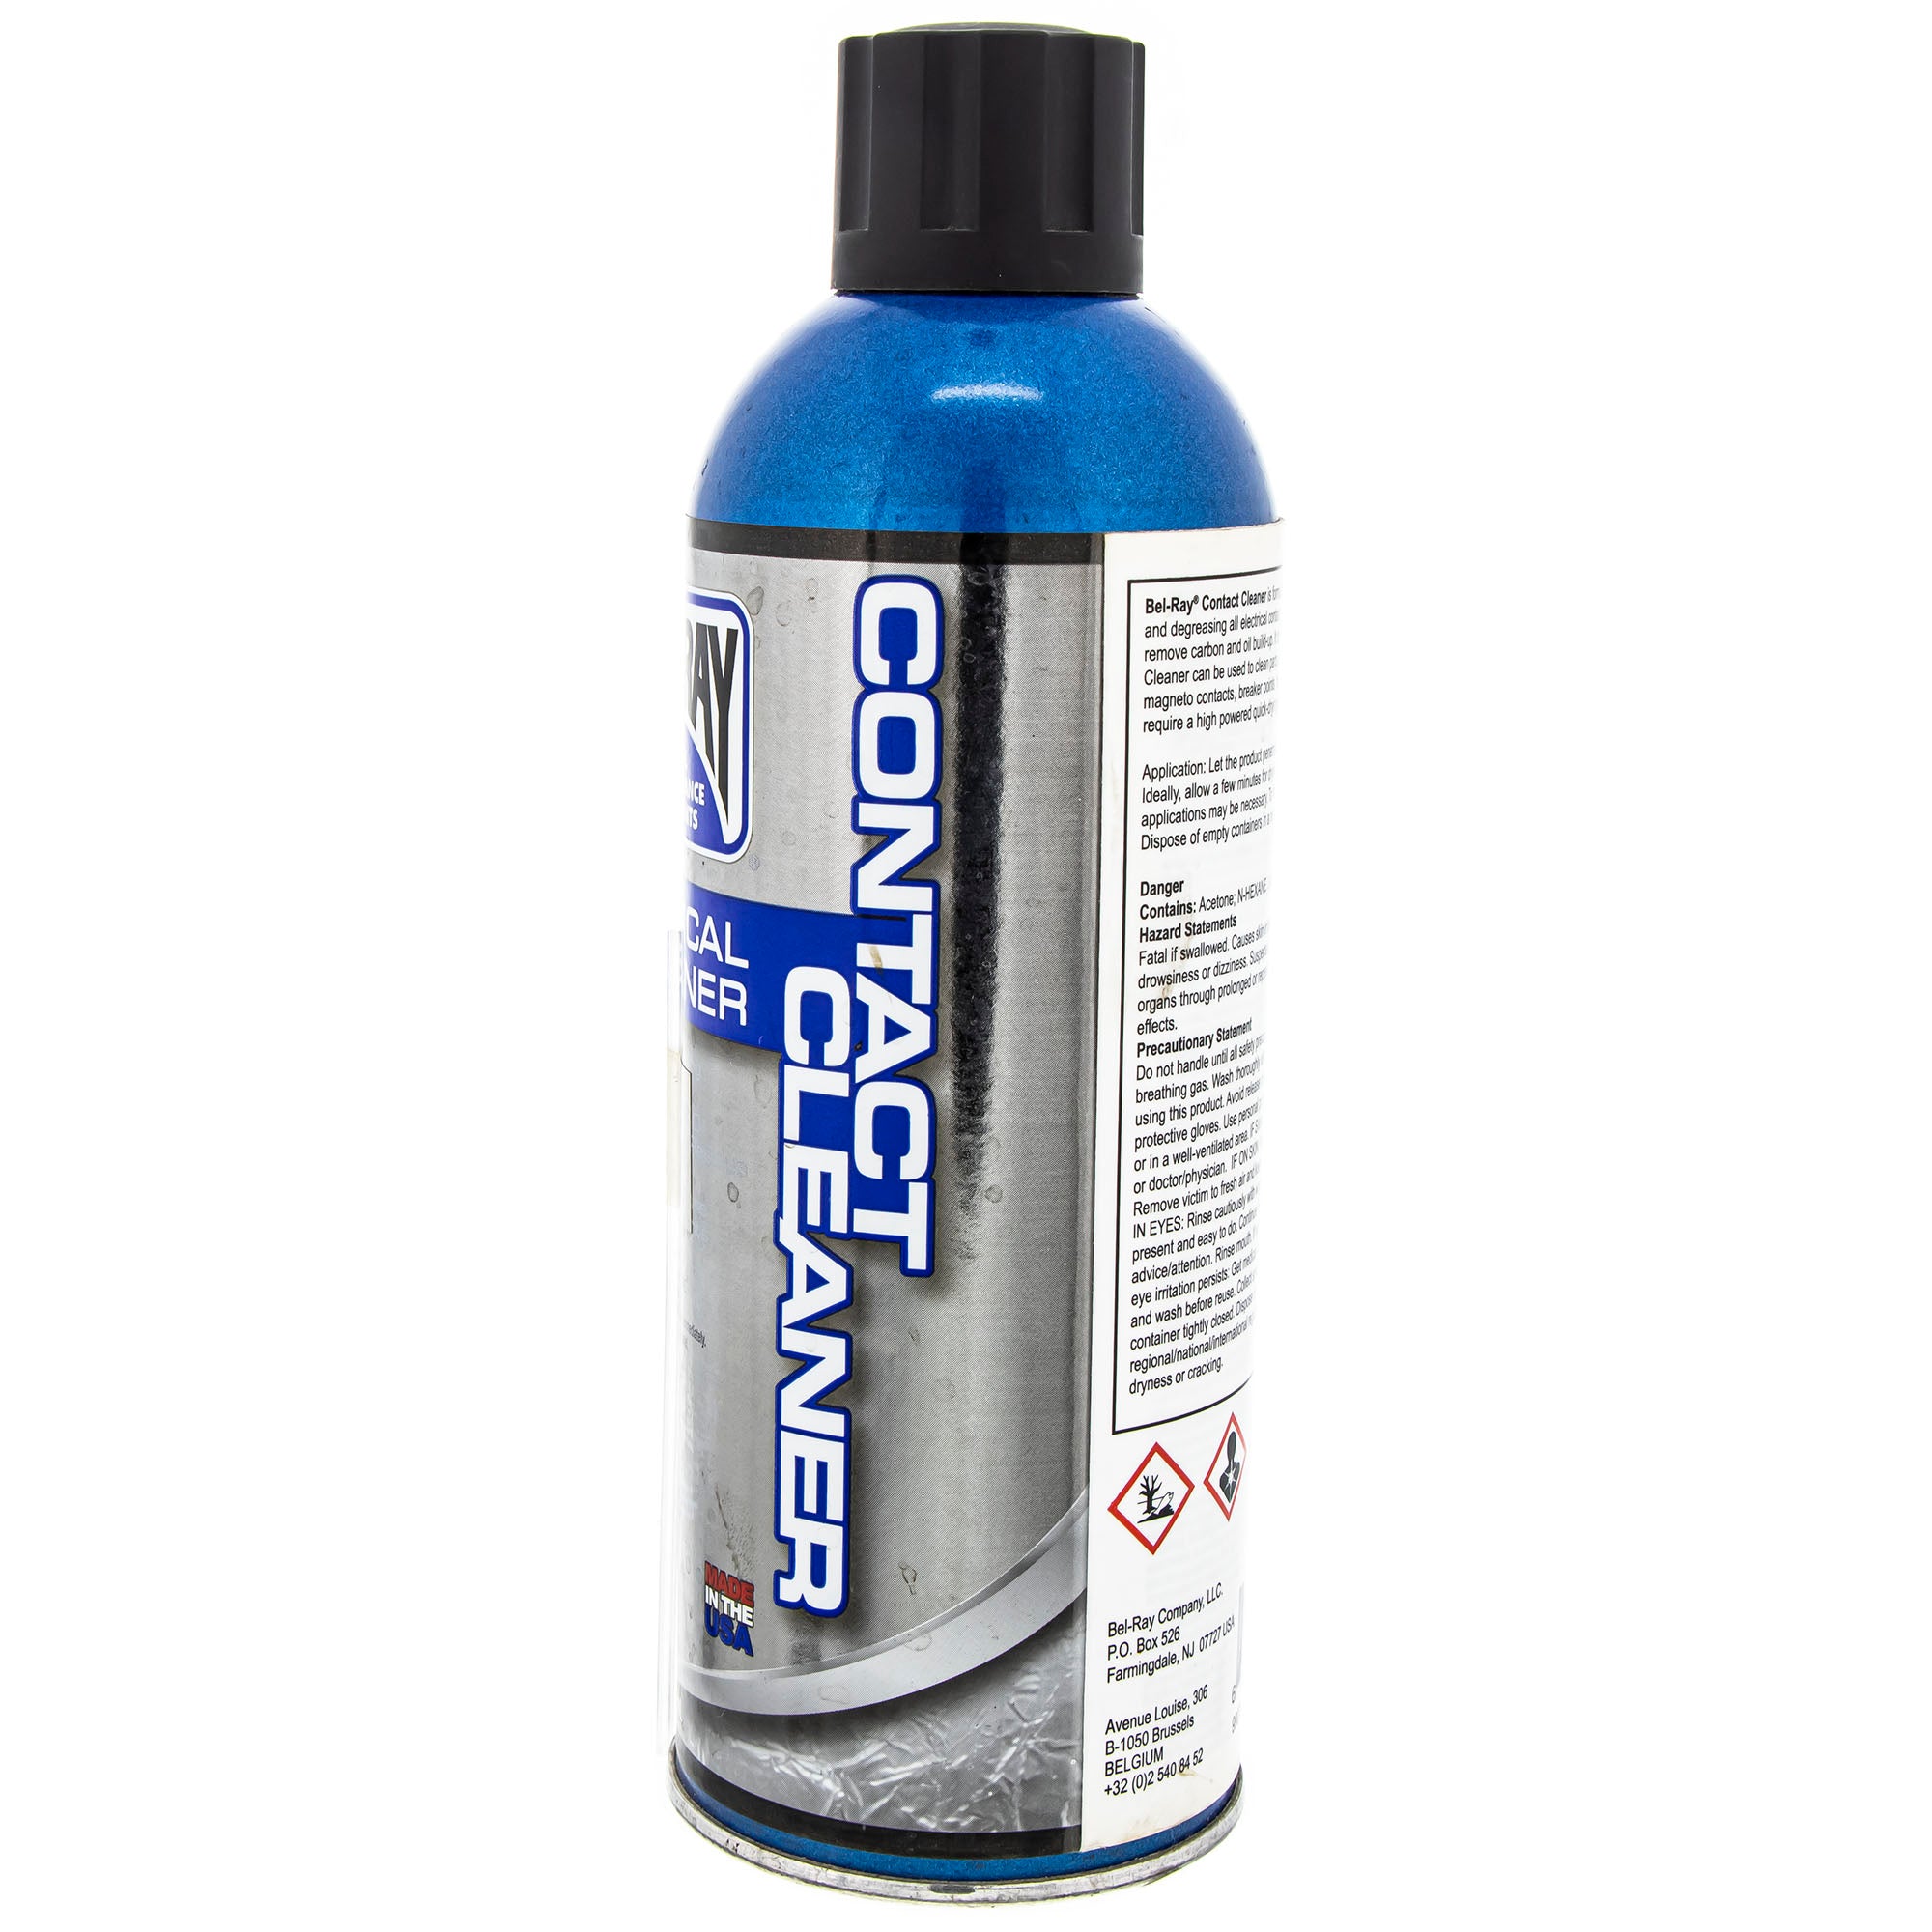 Bel-Ray 99075-A400W Electrical Contact Cleaner Degreaser Aerosol Spray Can 400ml 840-0406